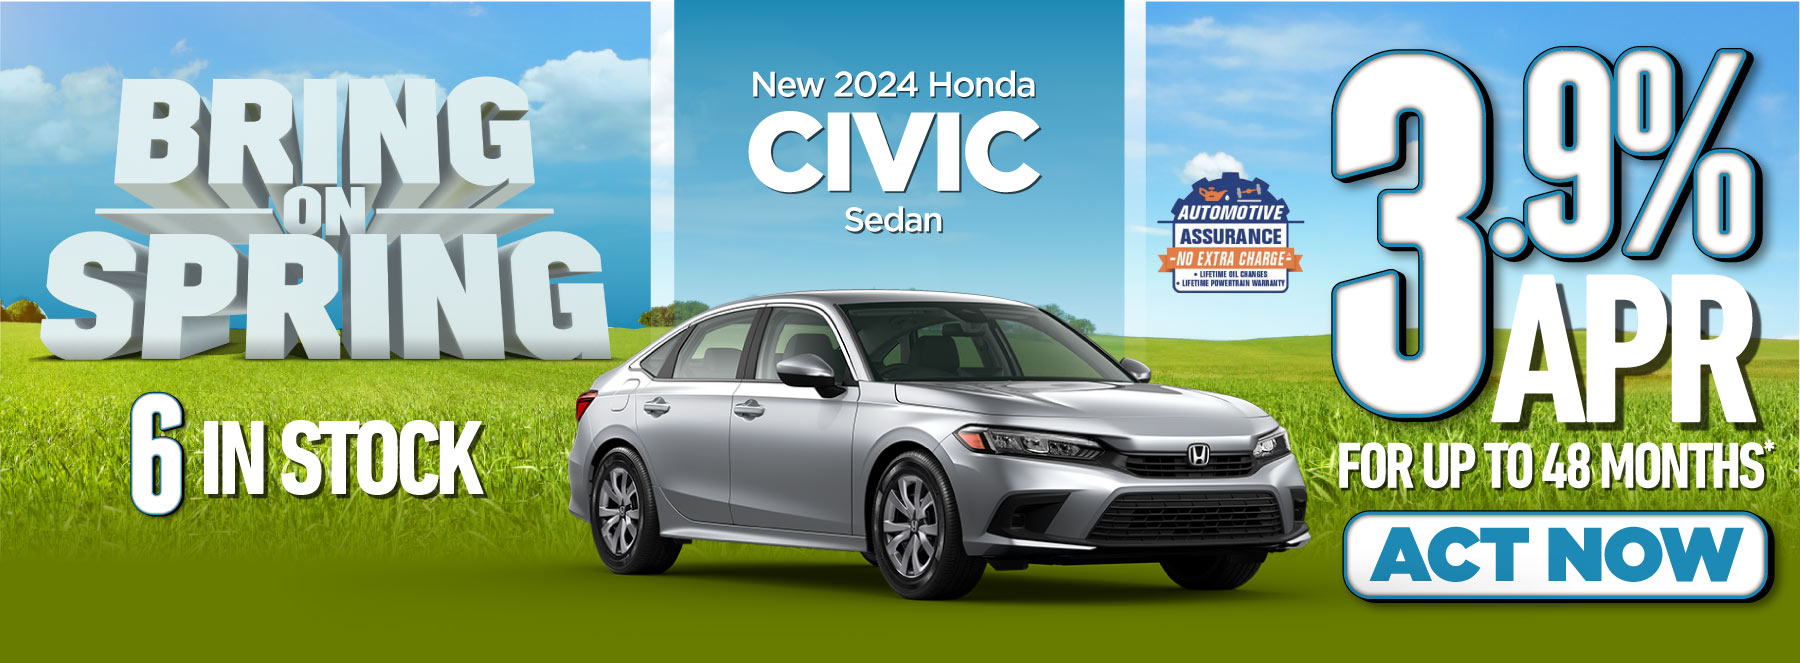 New 2024 Honda Civic Sedan - Get 3.9% APR for up to 48 months* | Act Now